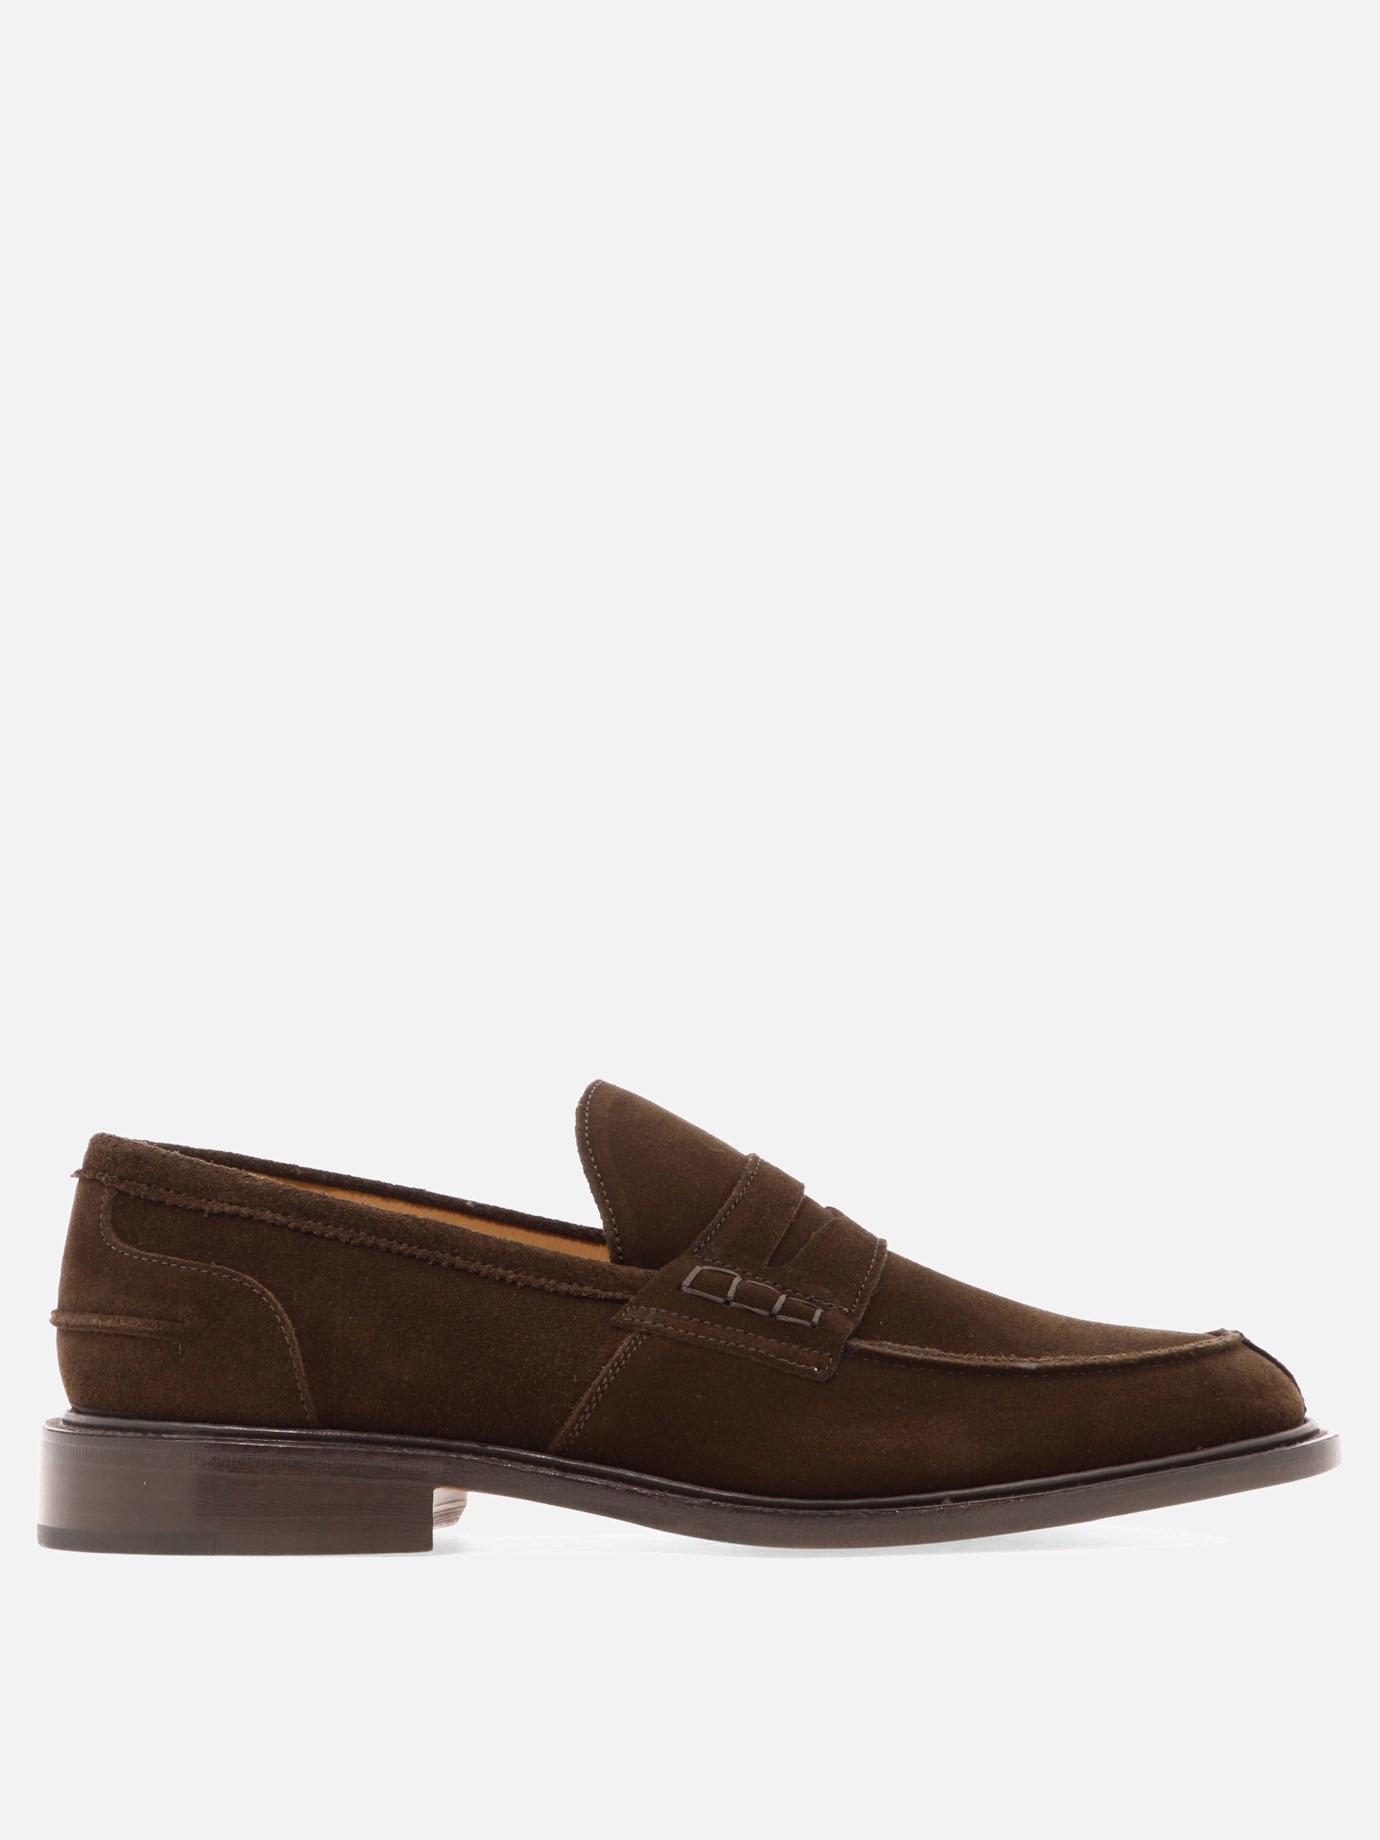  James  loafersby Tricker's - 5